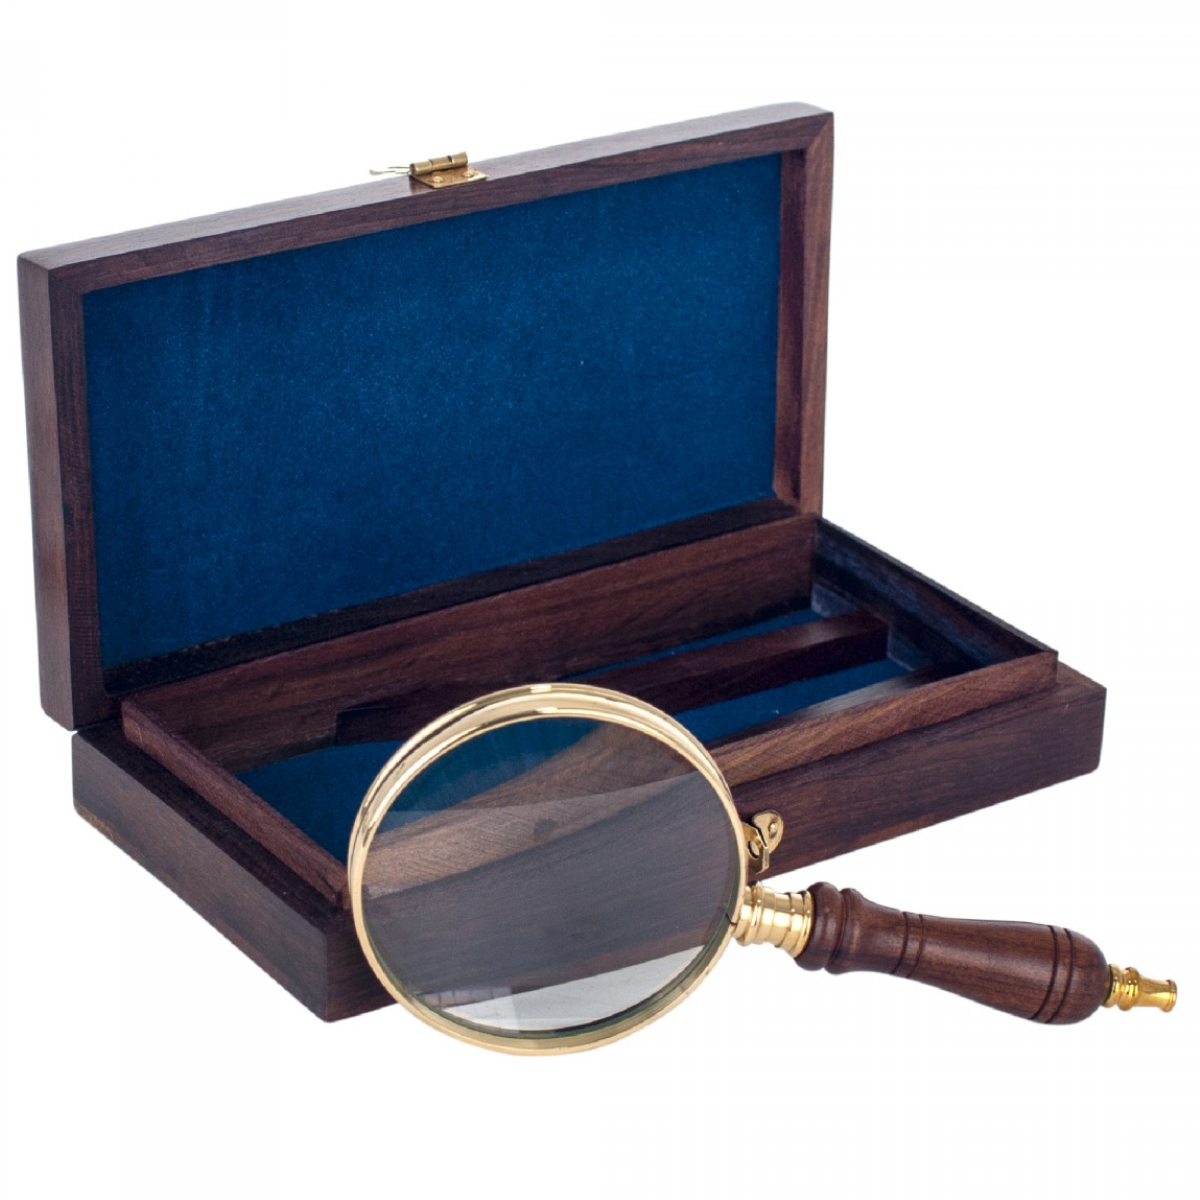 Decorative magnifier in wooden box